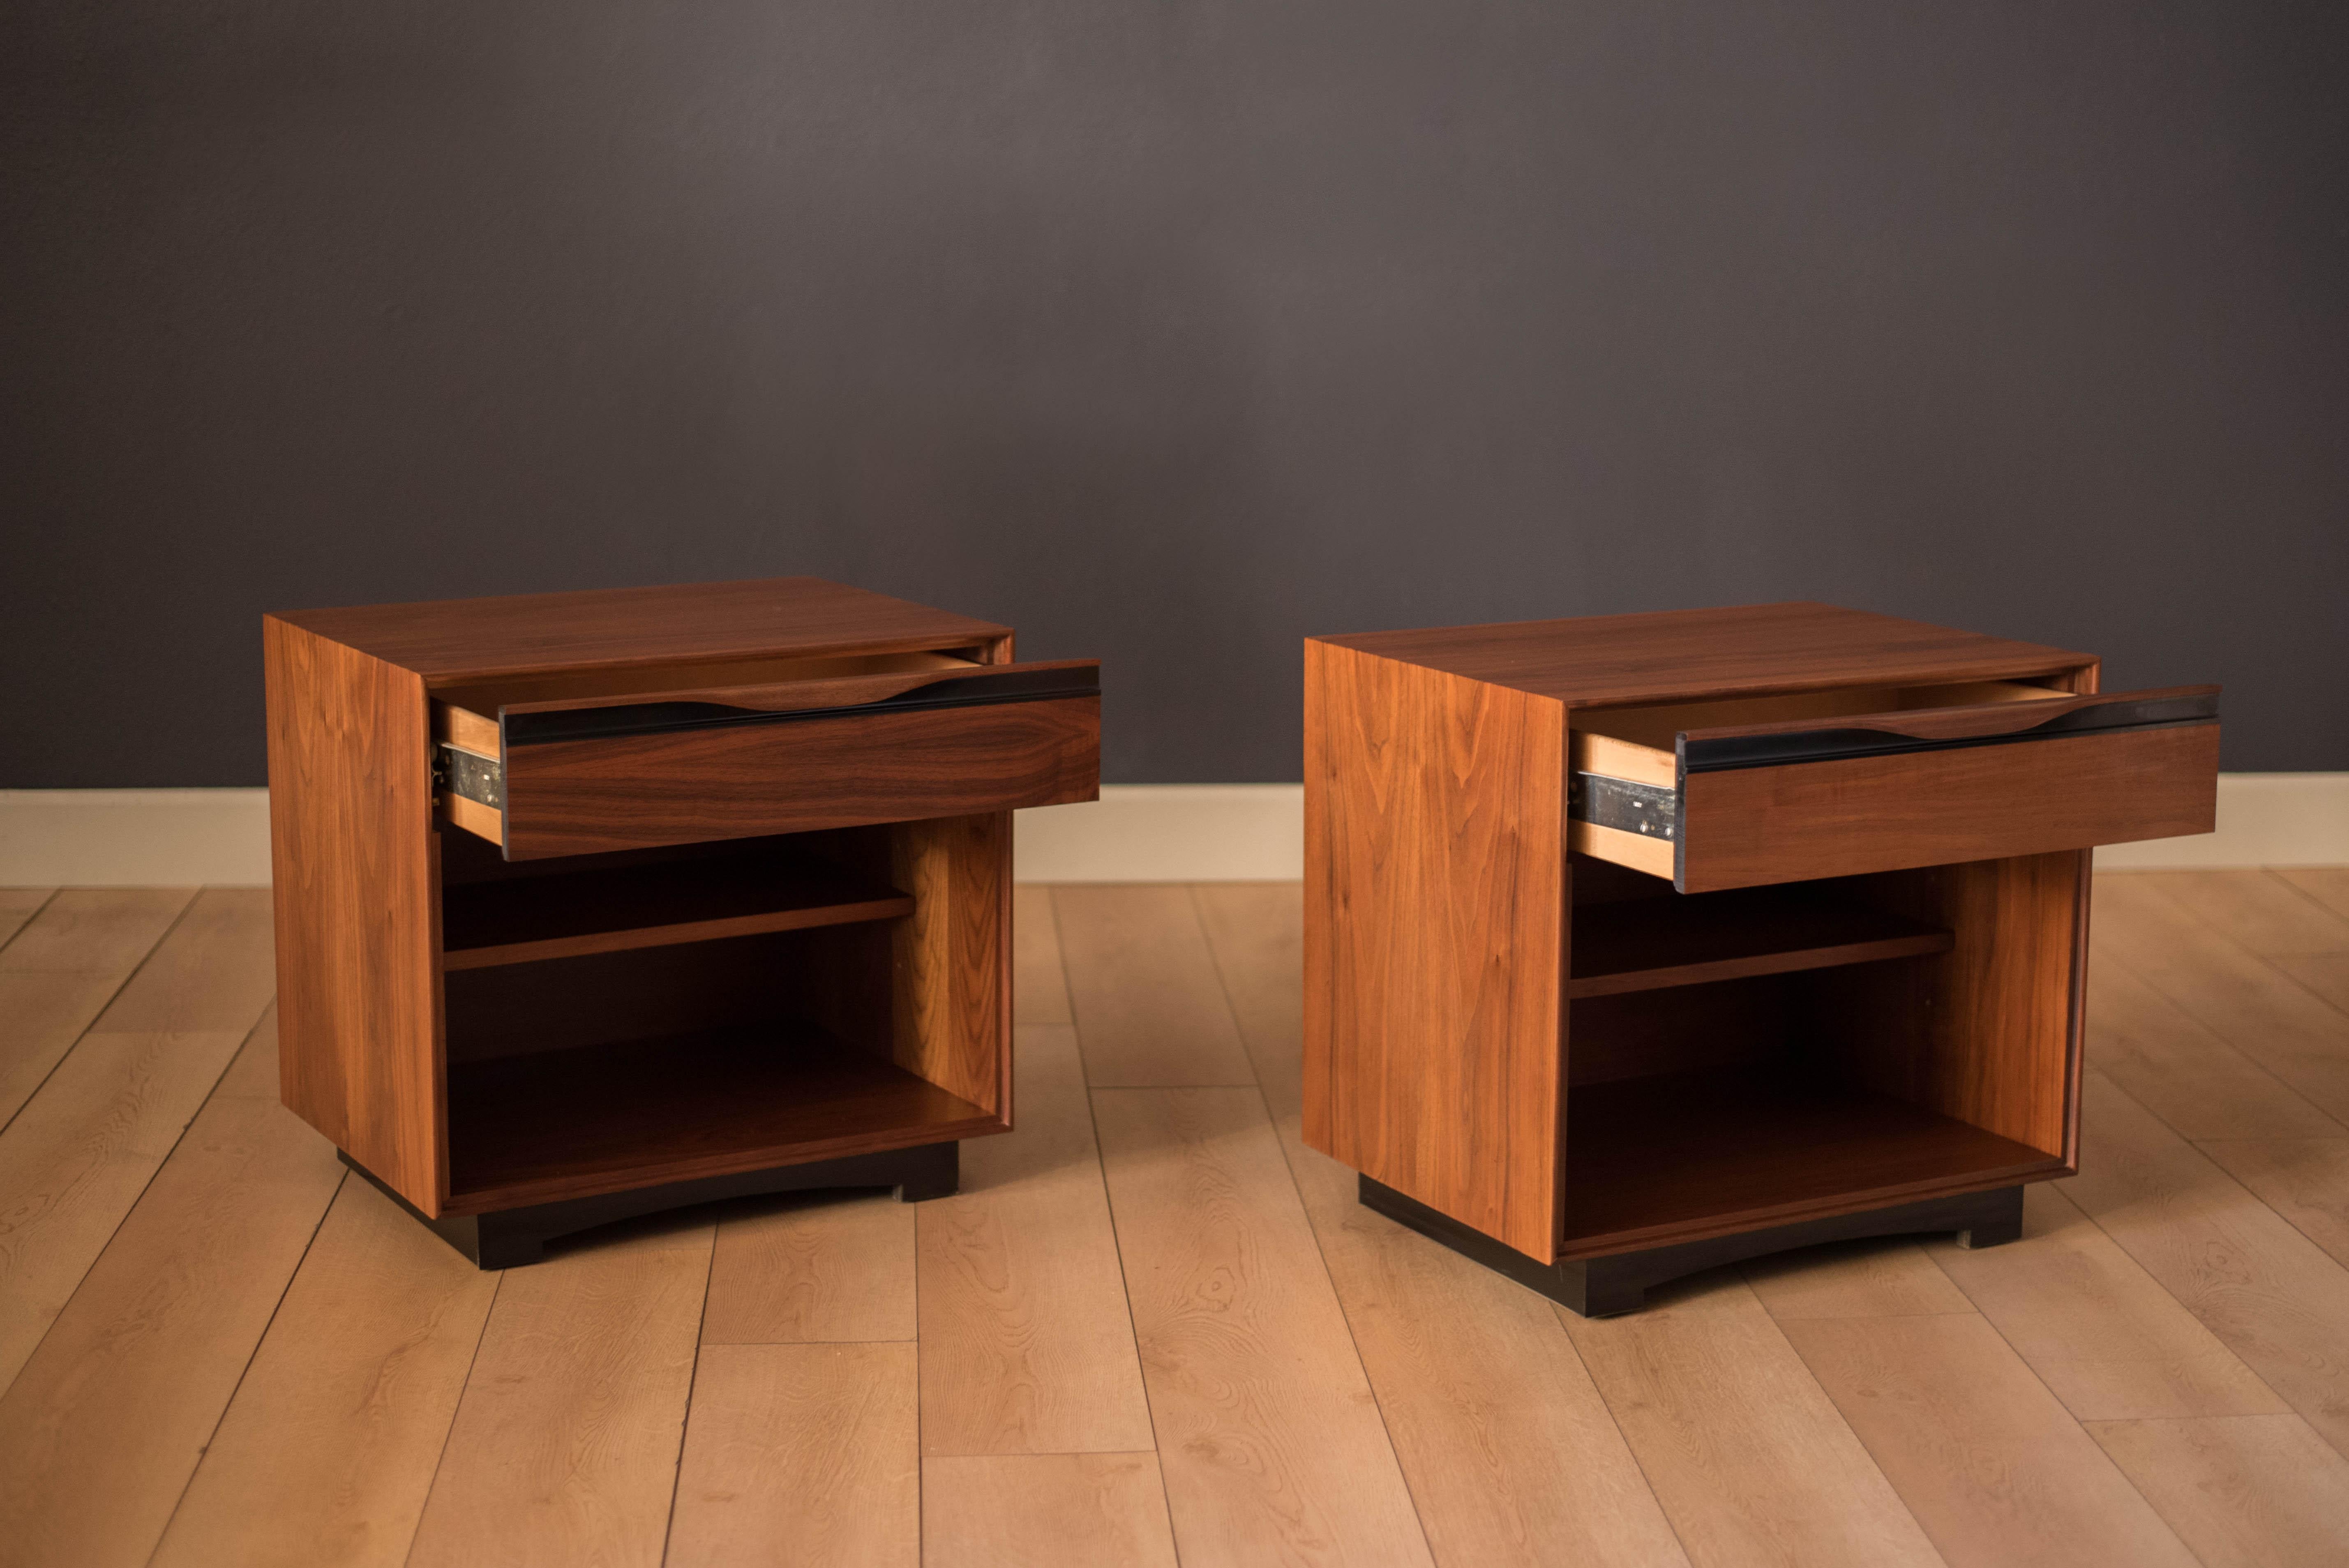 Mid-Century Modern pair of nightstands designed by John Kapel for Glenn of California in walnut. Includes one drawer and an adjustable shelf on each bedside table.
   


Offered by Mid Century Maddist